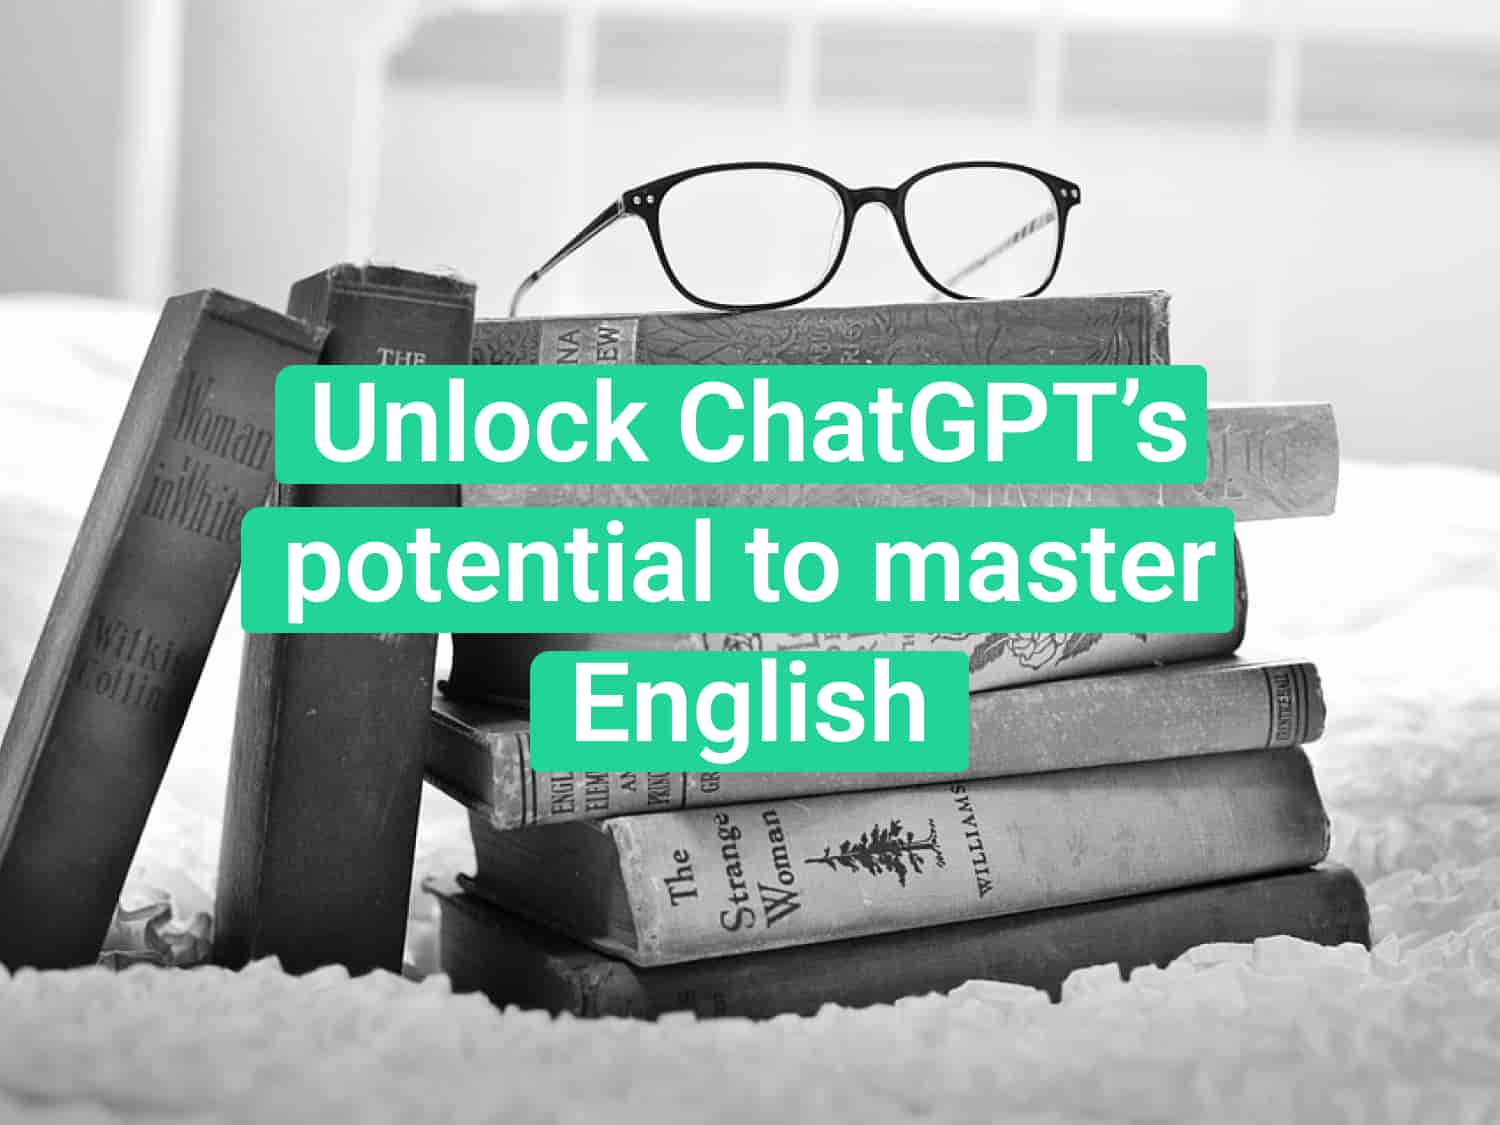 How to use ChatGPT for learning English